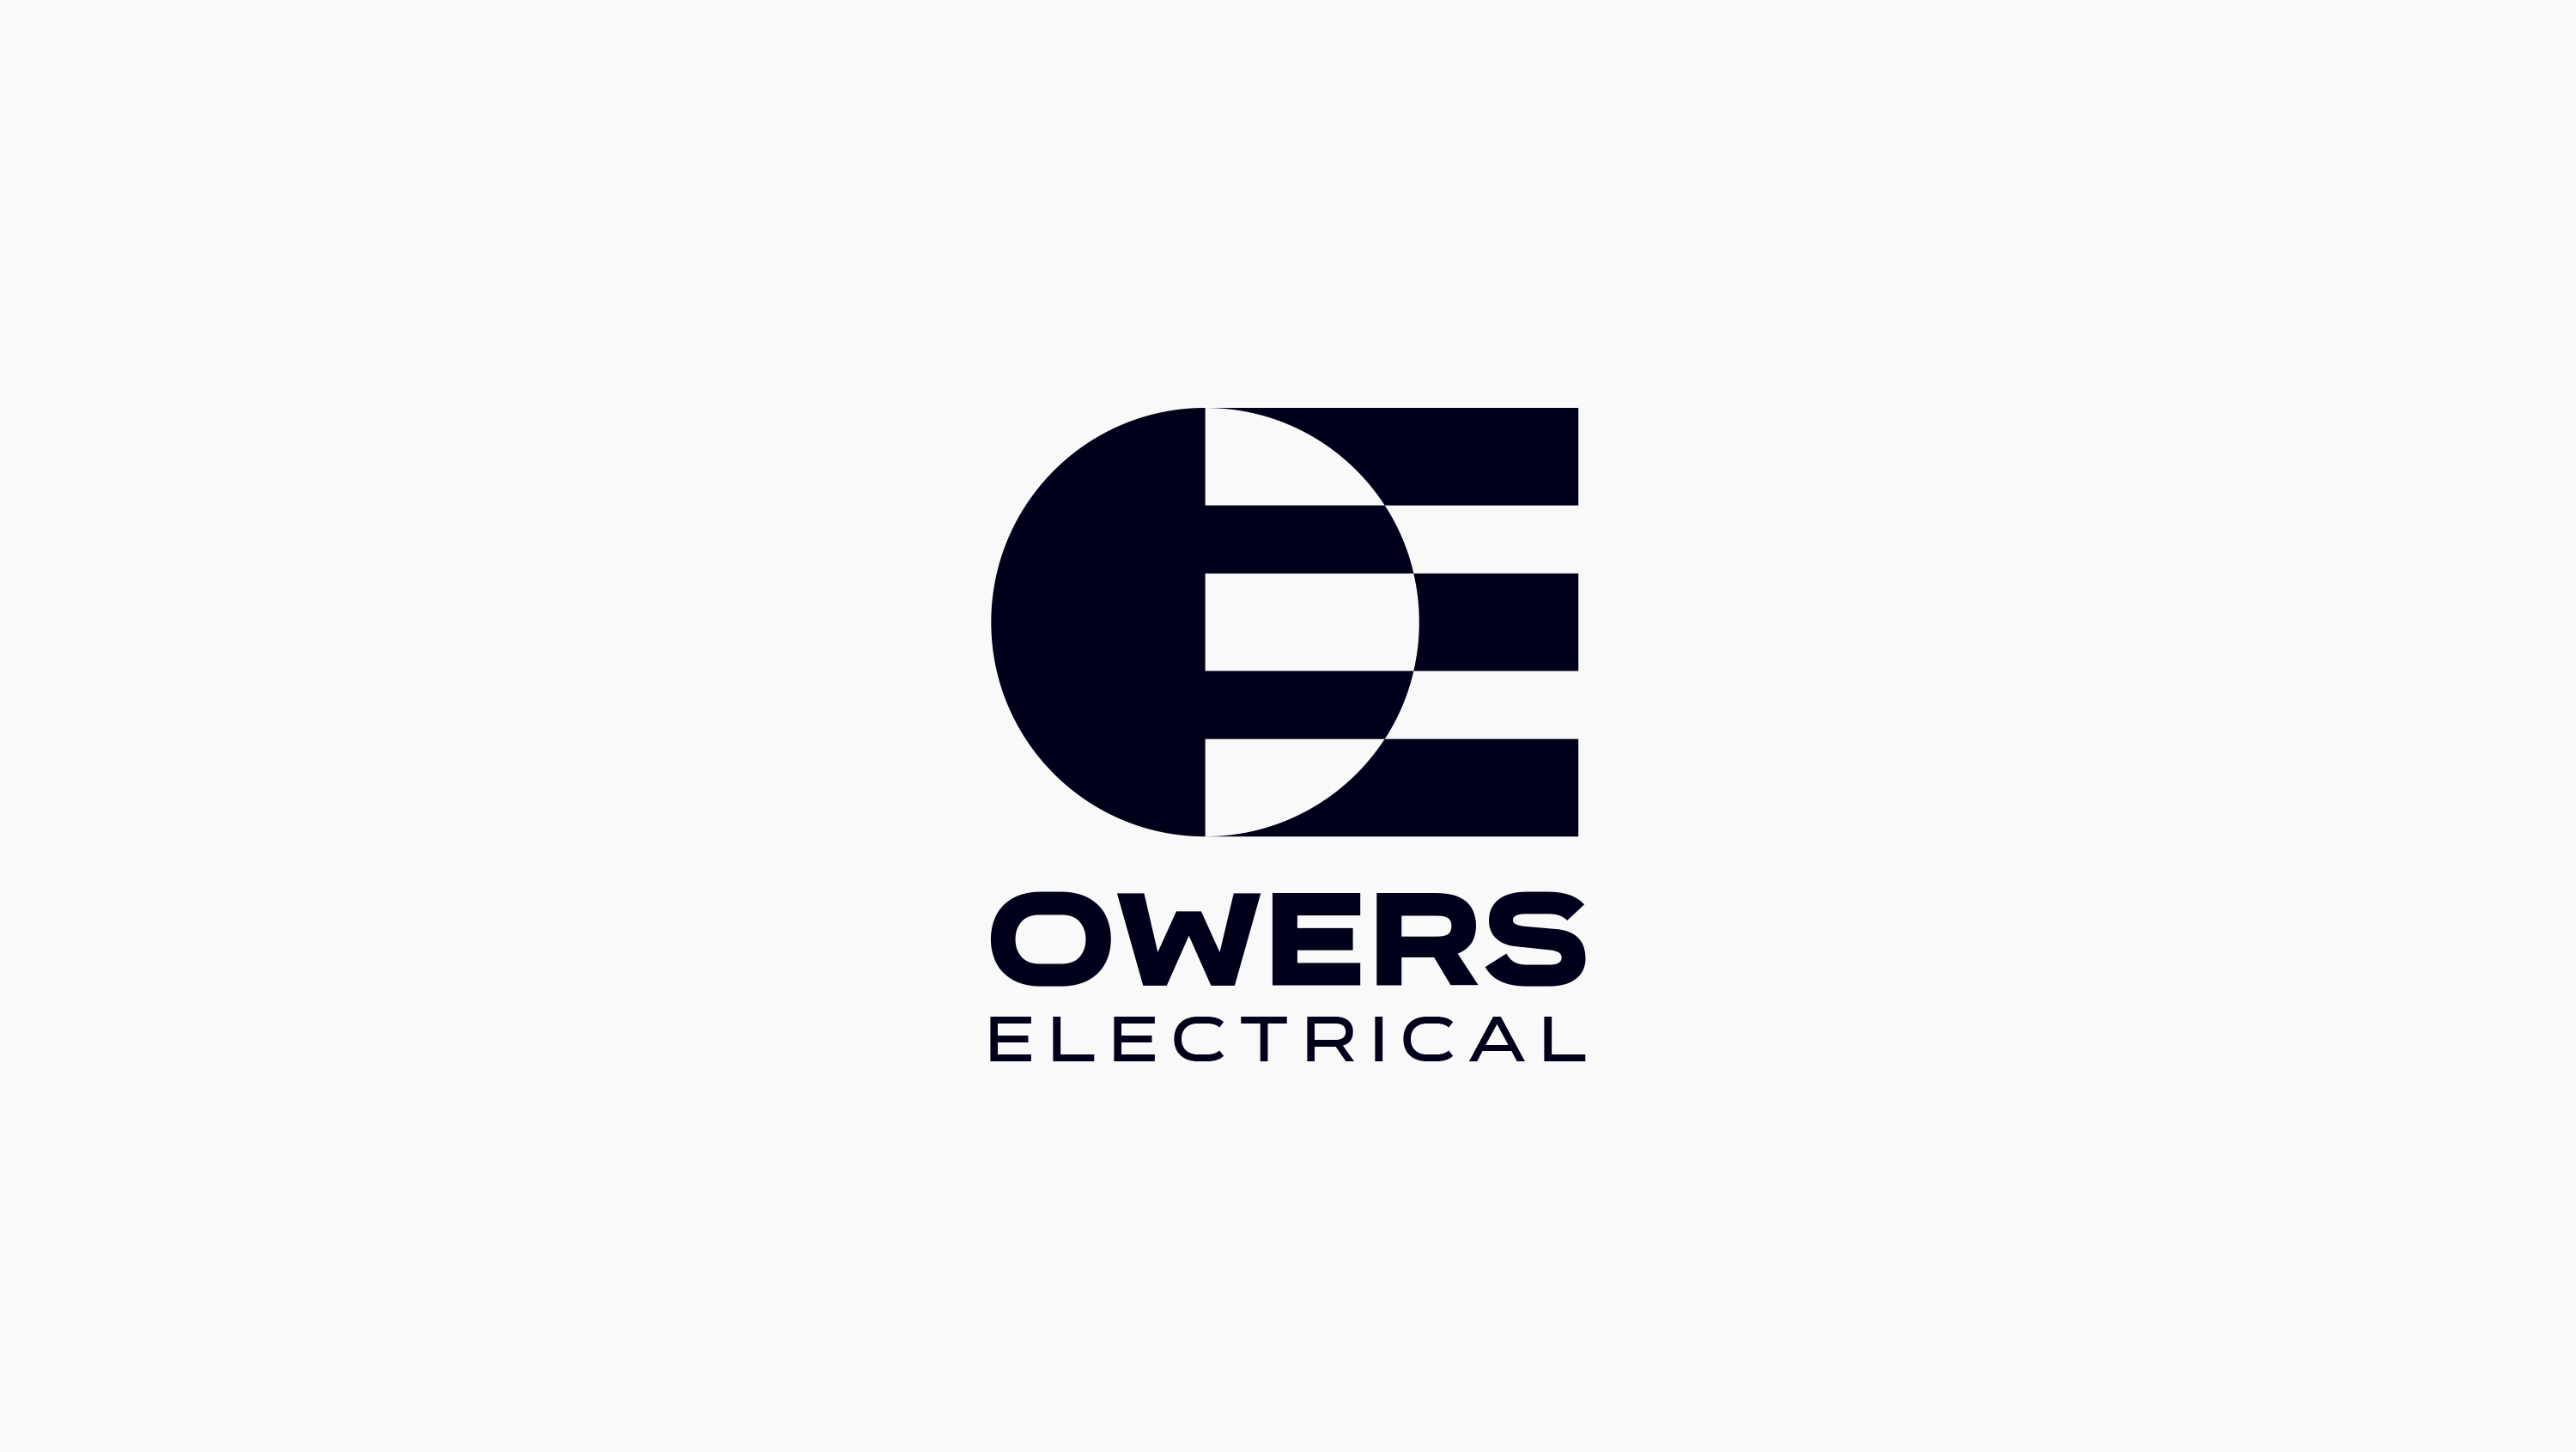 JamJo Logo Design Services - Owers Electrical